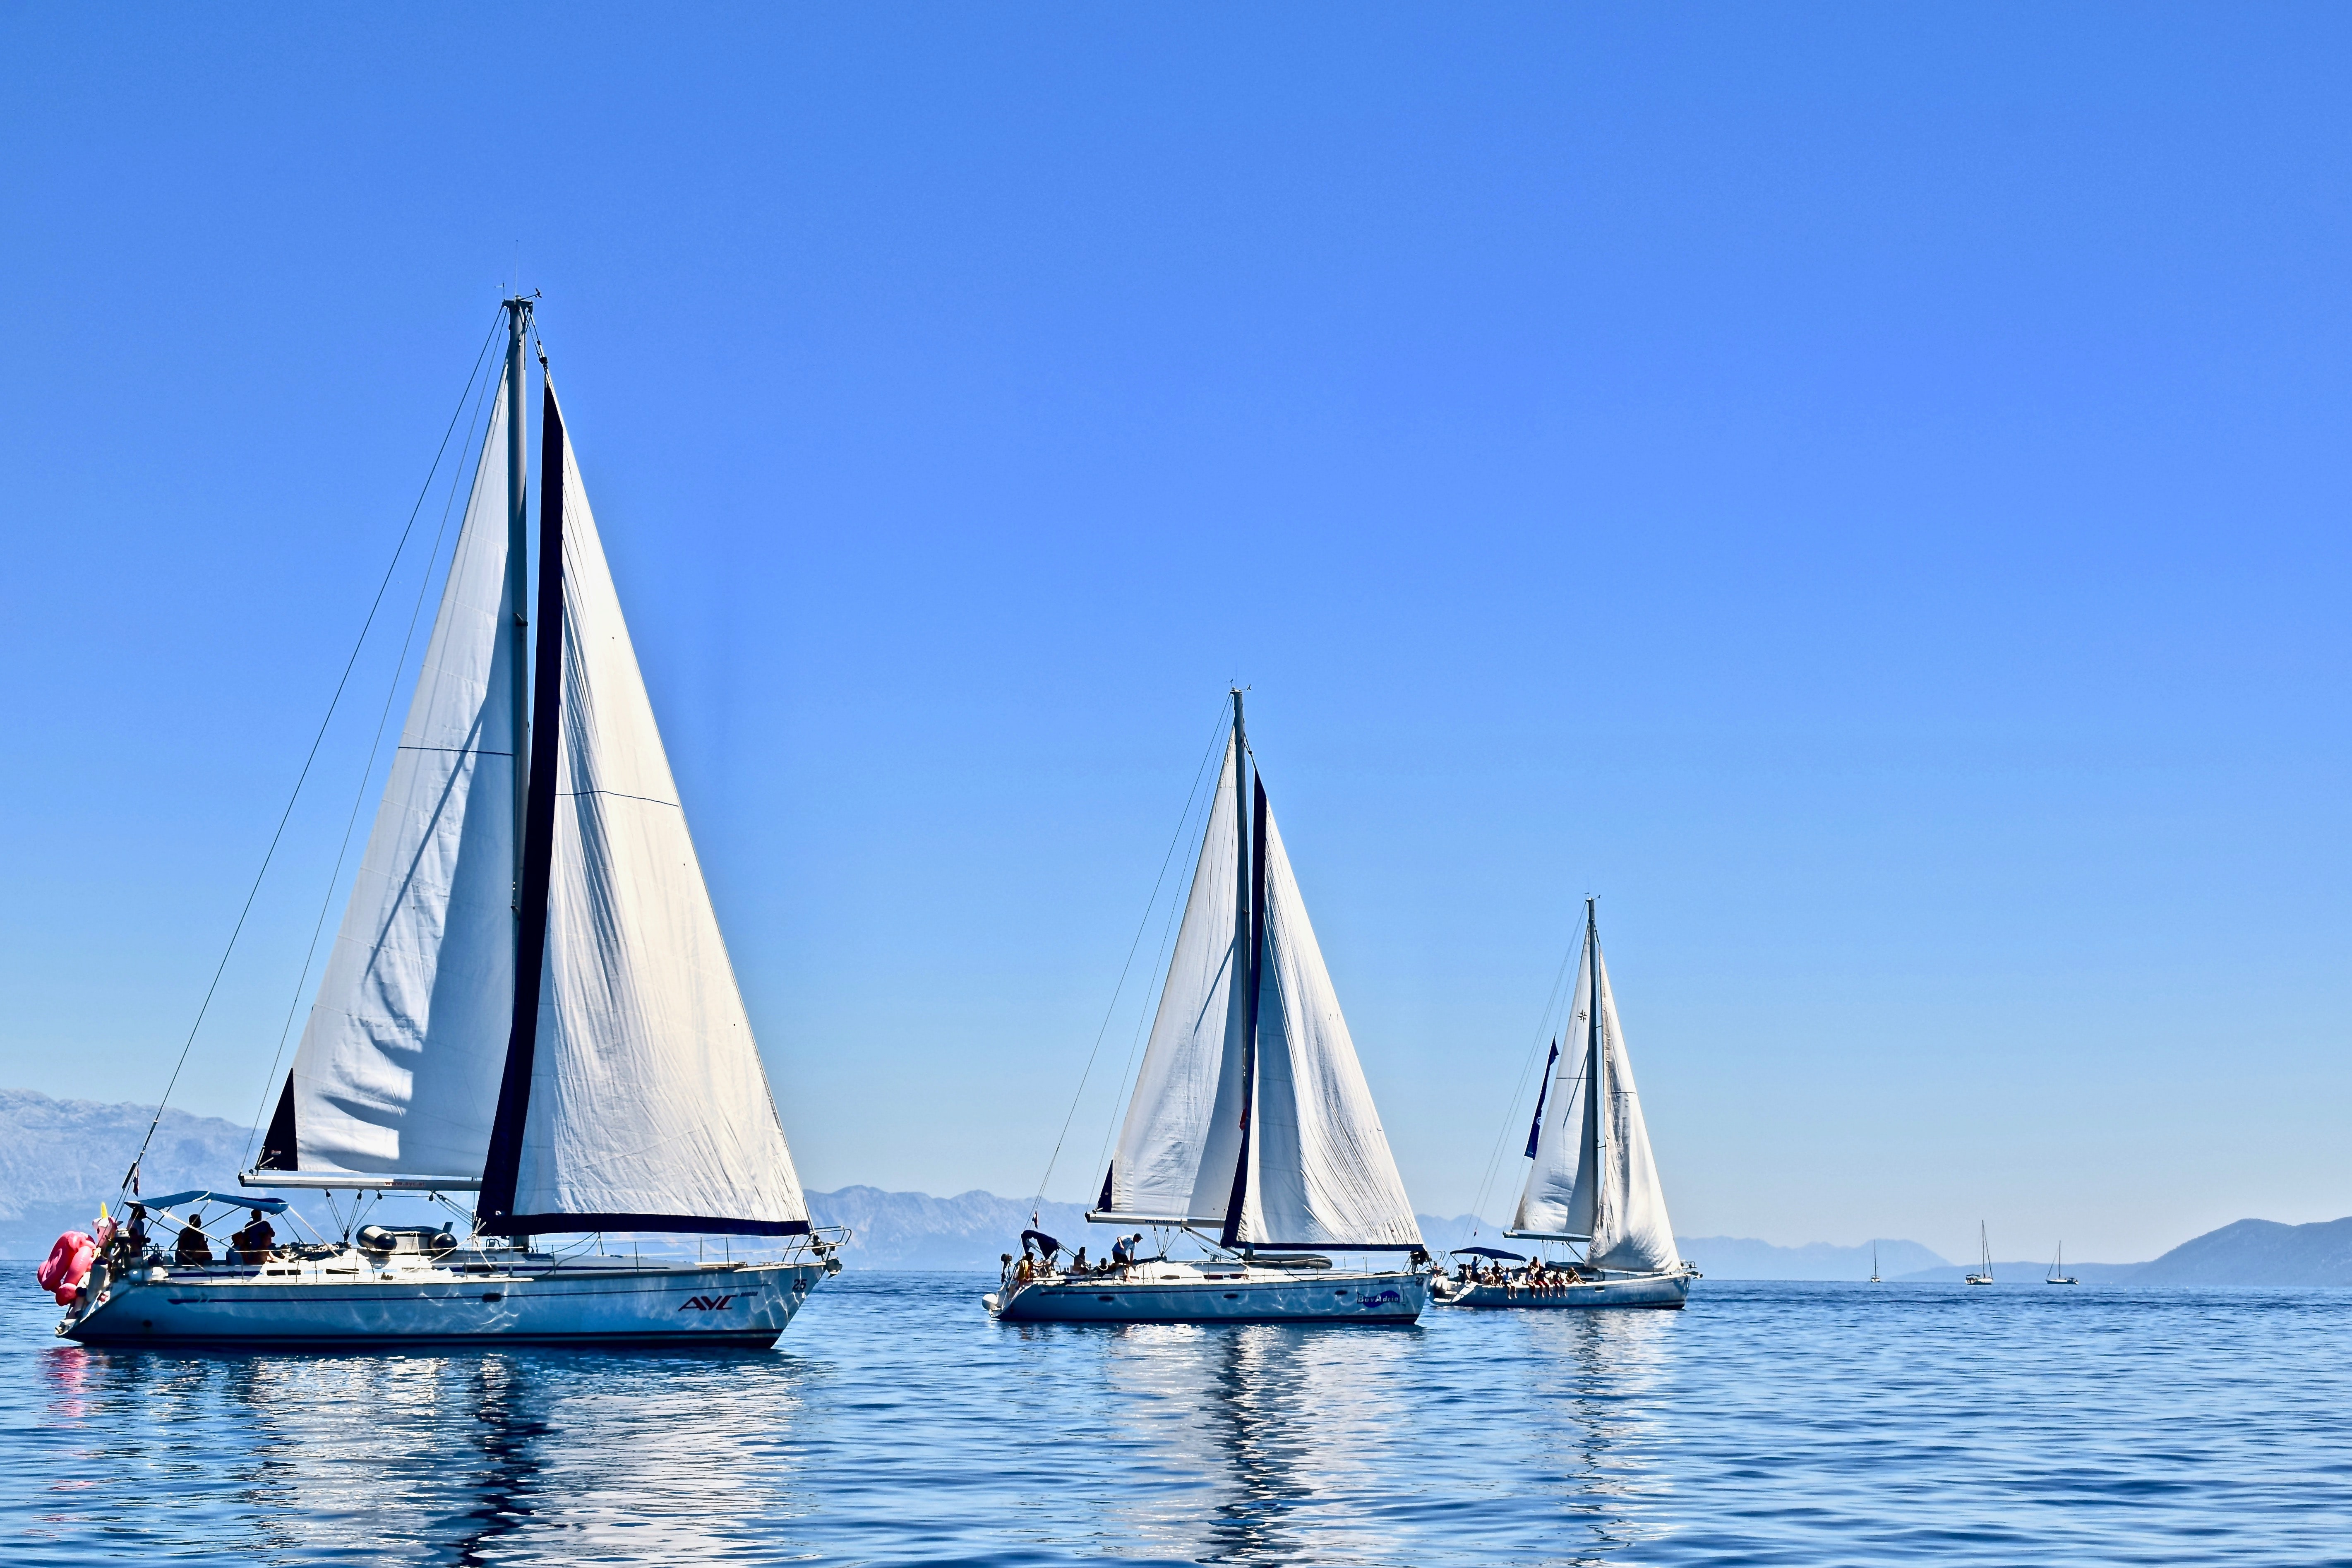 Sailing Boat on the Ocean